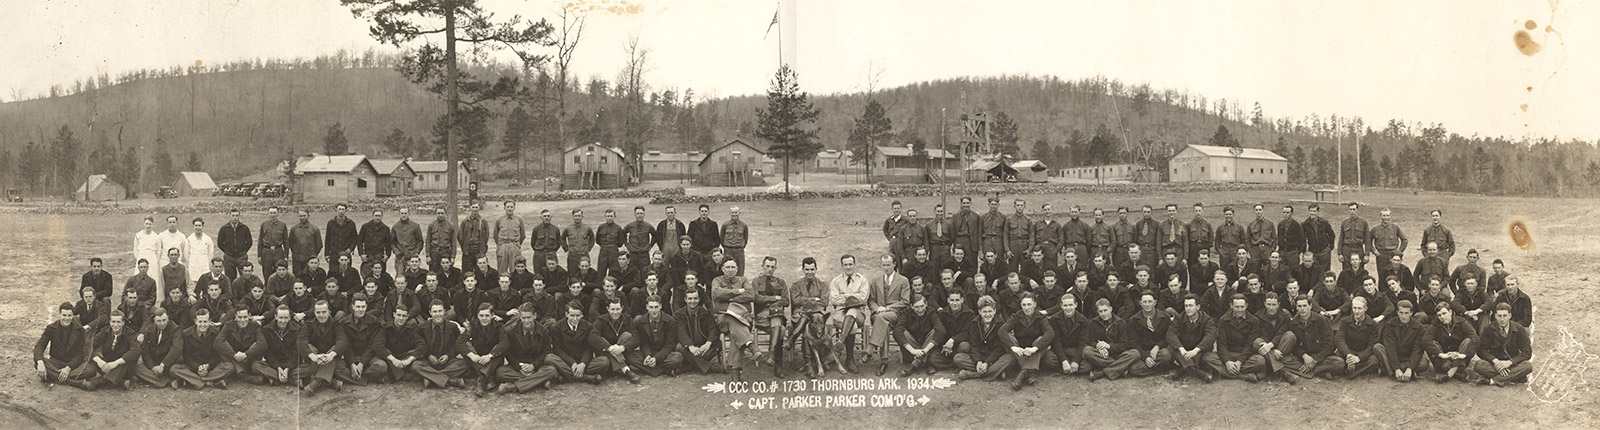 Group of white men in uniform with camp buildings behind them